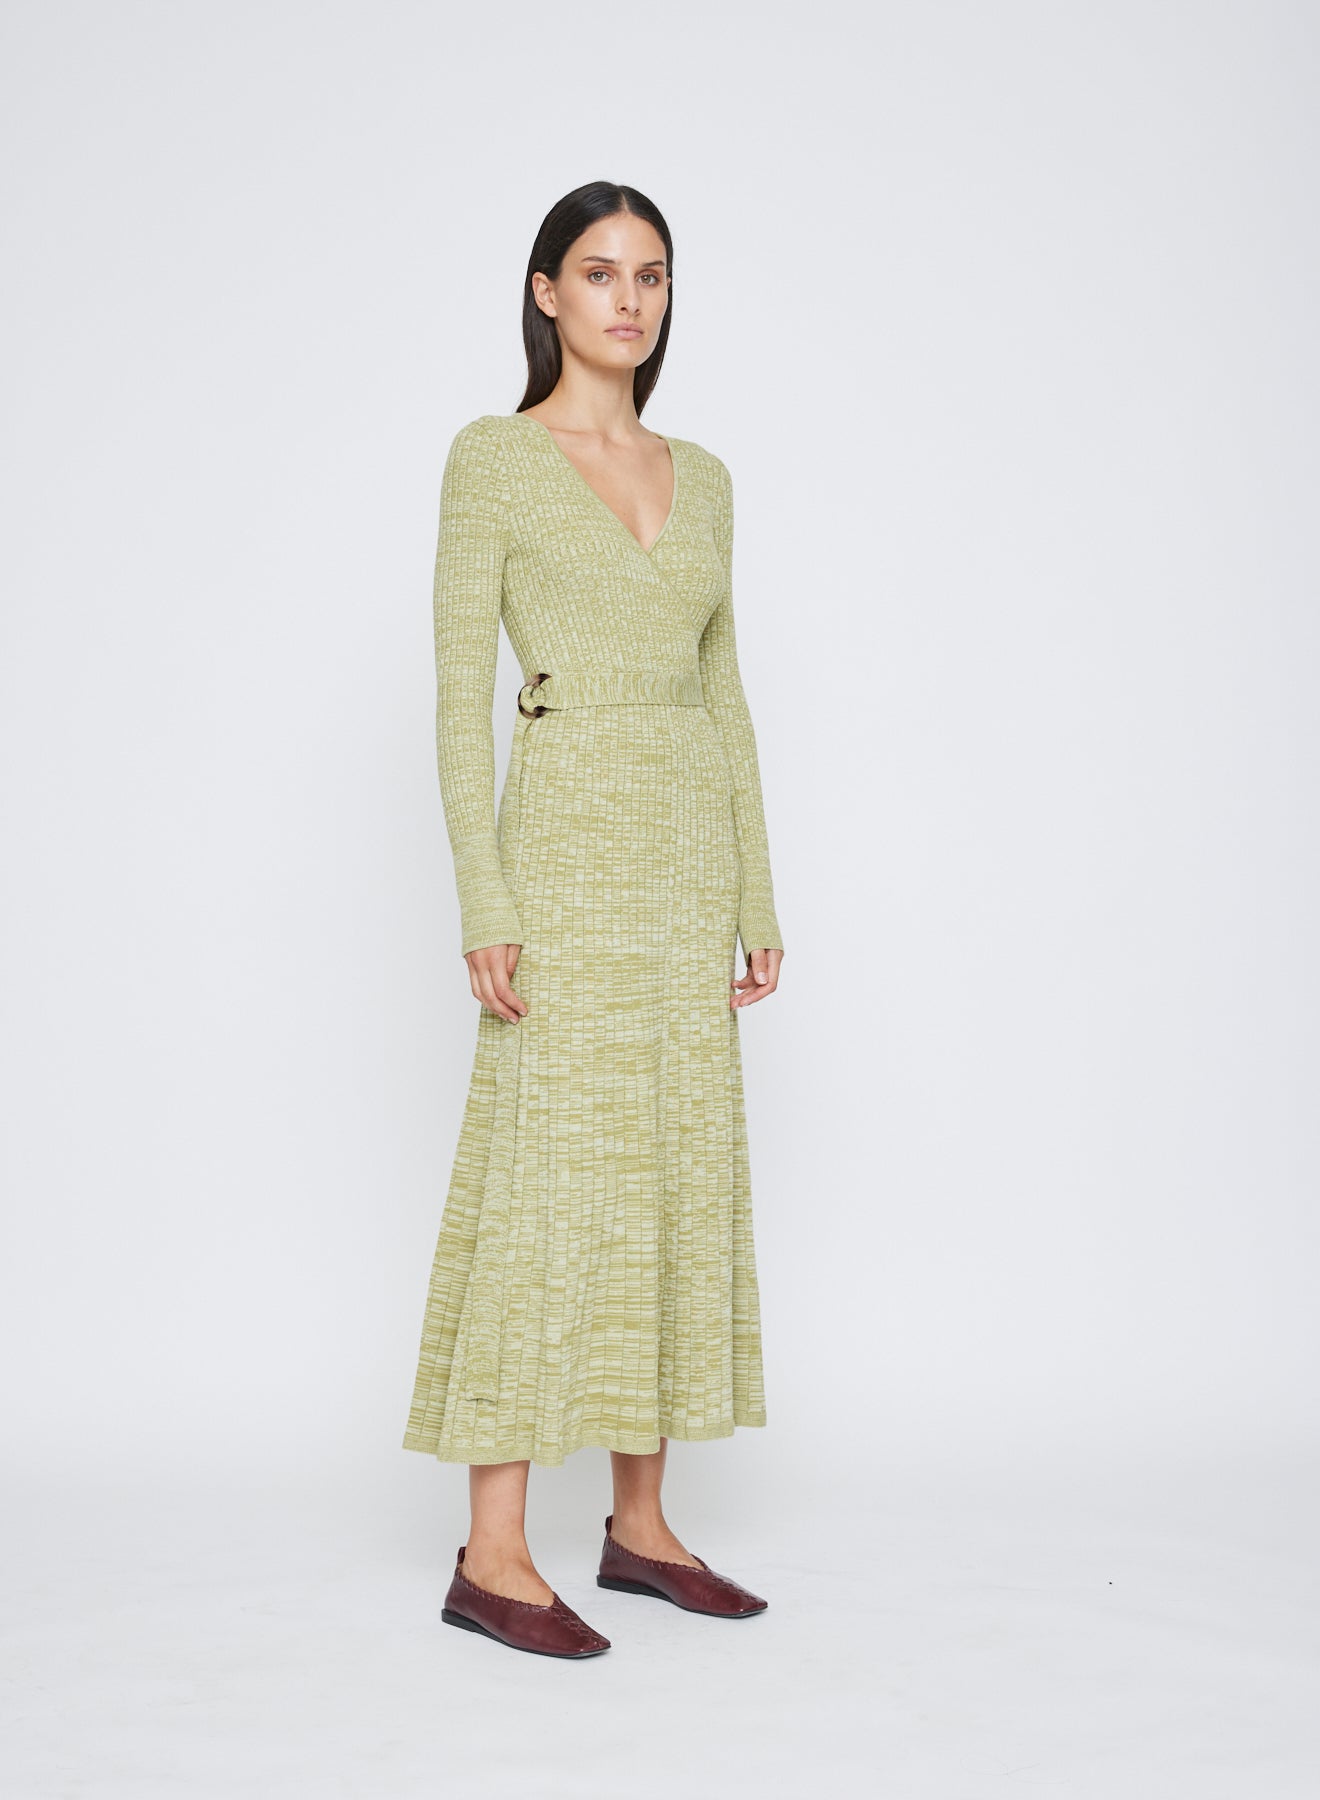 Wrap Midi Knit Dress with a stylish waist belt and resin belt, combining comfort and sophistication for everyday wear. A-line skirt and v-neckline with long sleeves and the hem skimming the ankle. Workwear dress, Winter dress, everyday dress, long sleeve dress.